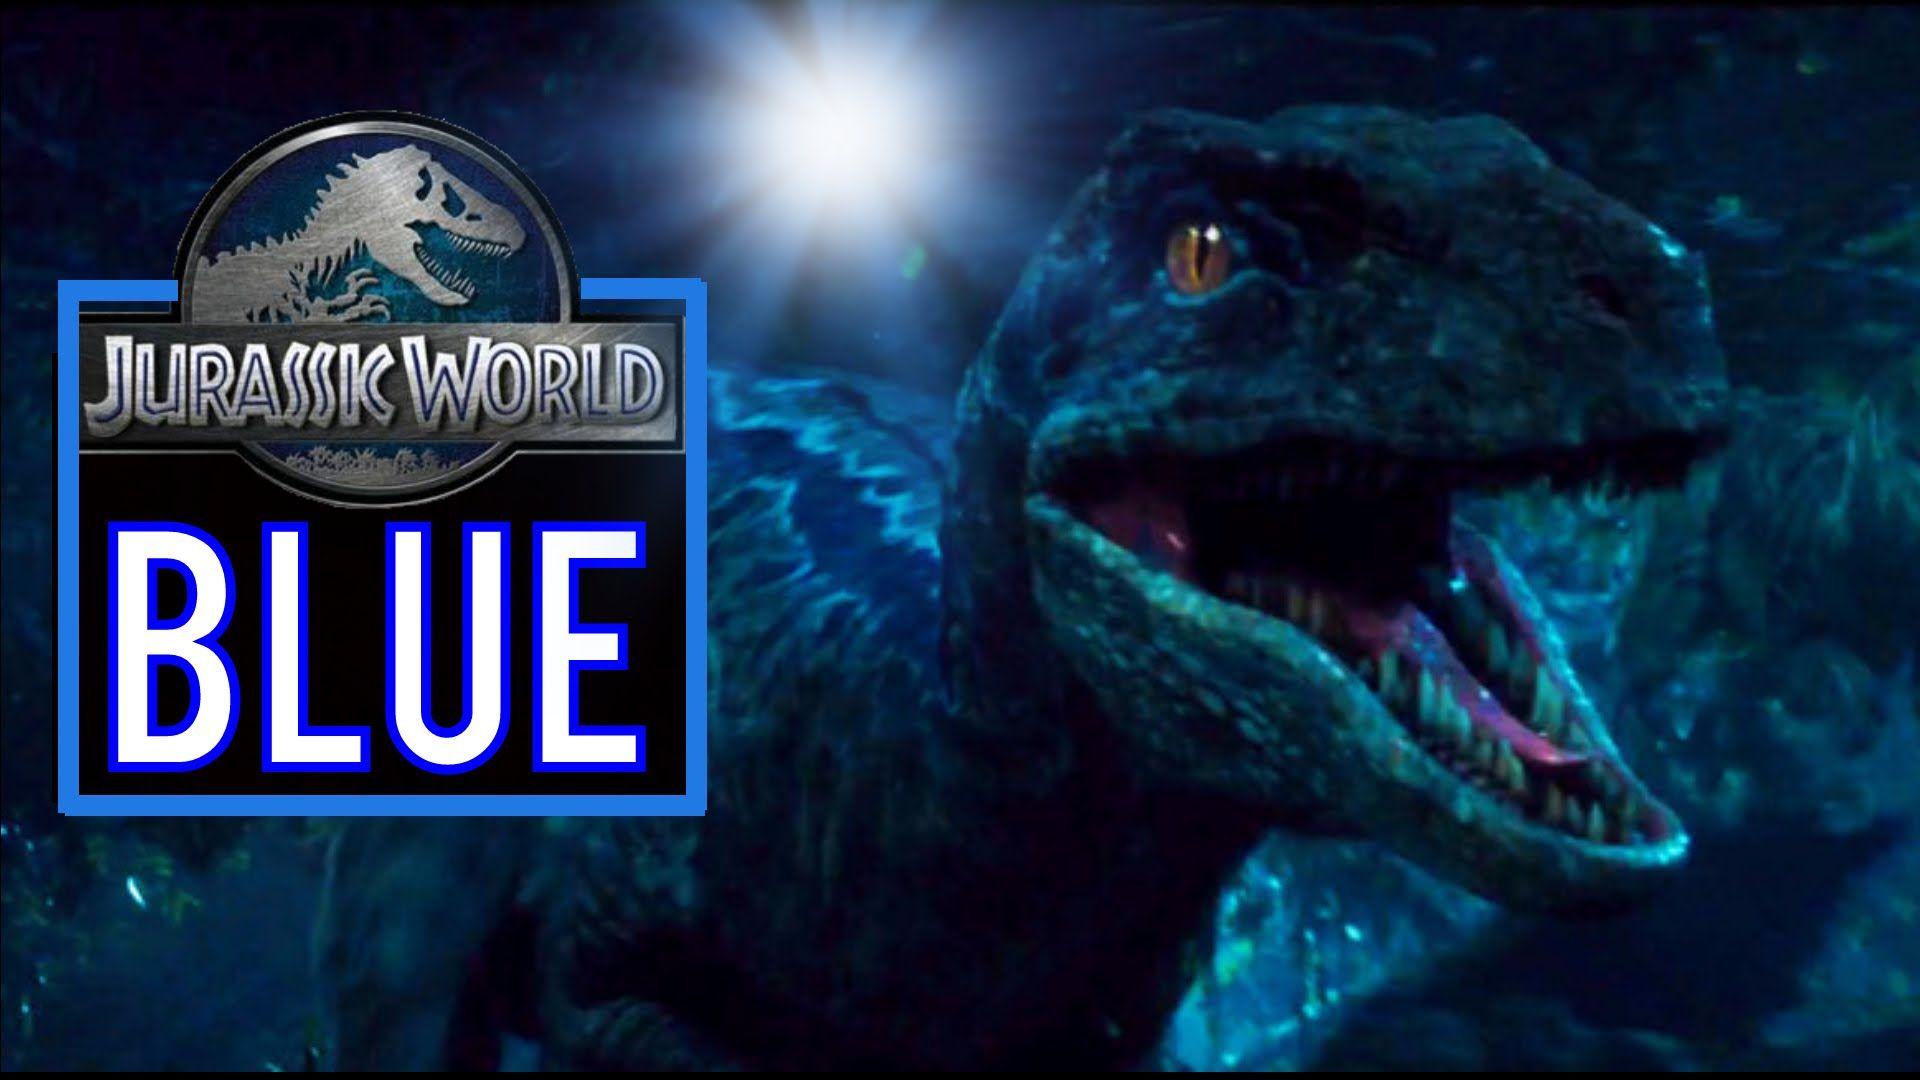 Jurassic World Blue Wallpaper.GiftWatches.CO